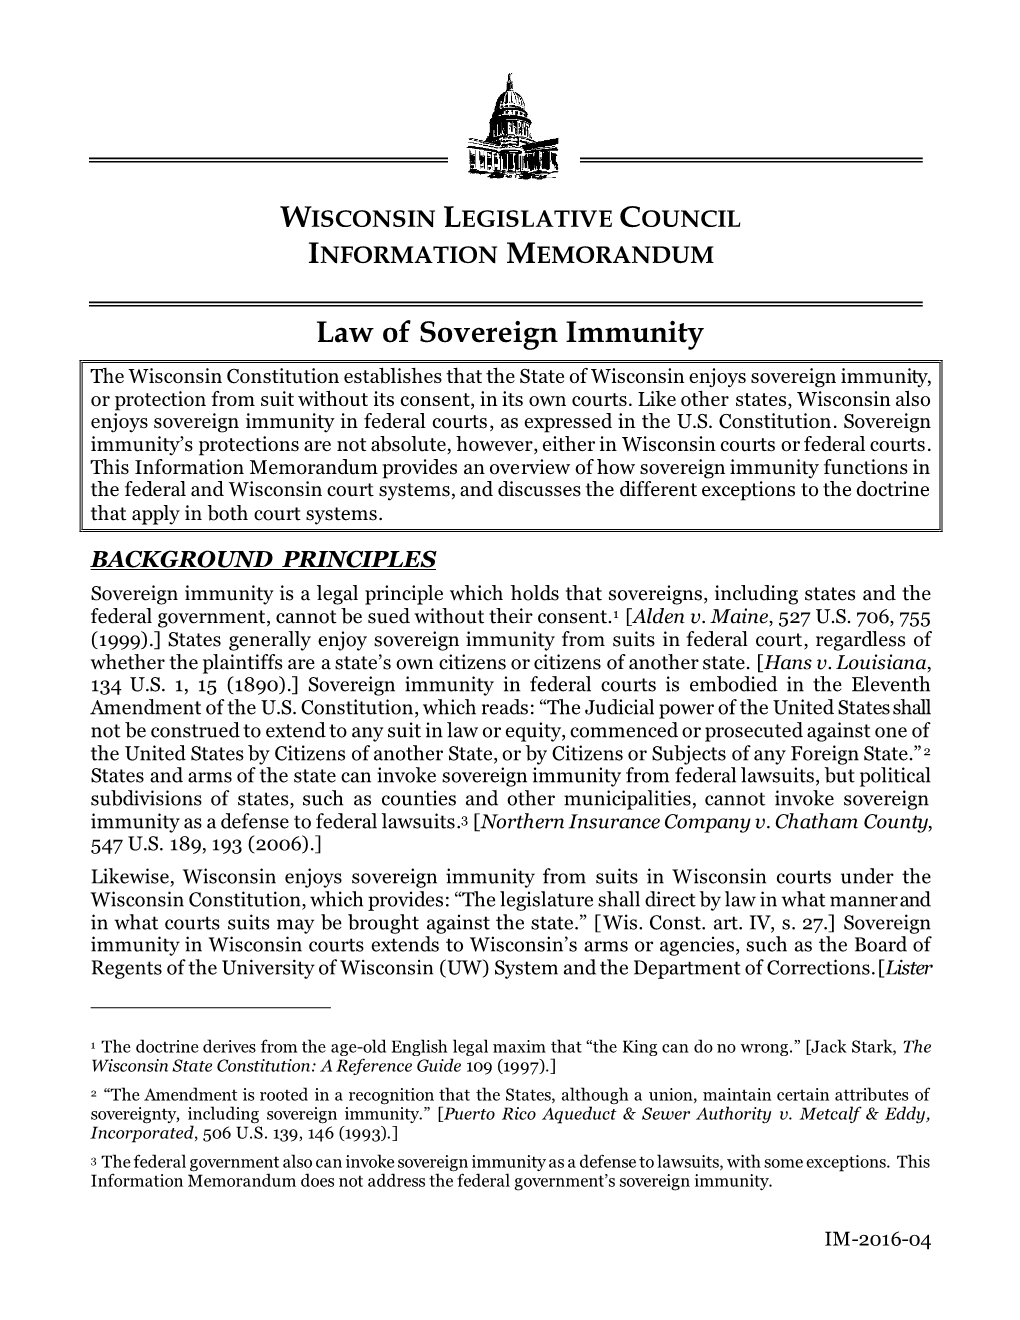 Law of Sovereign Immunity